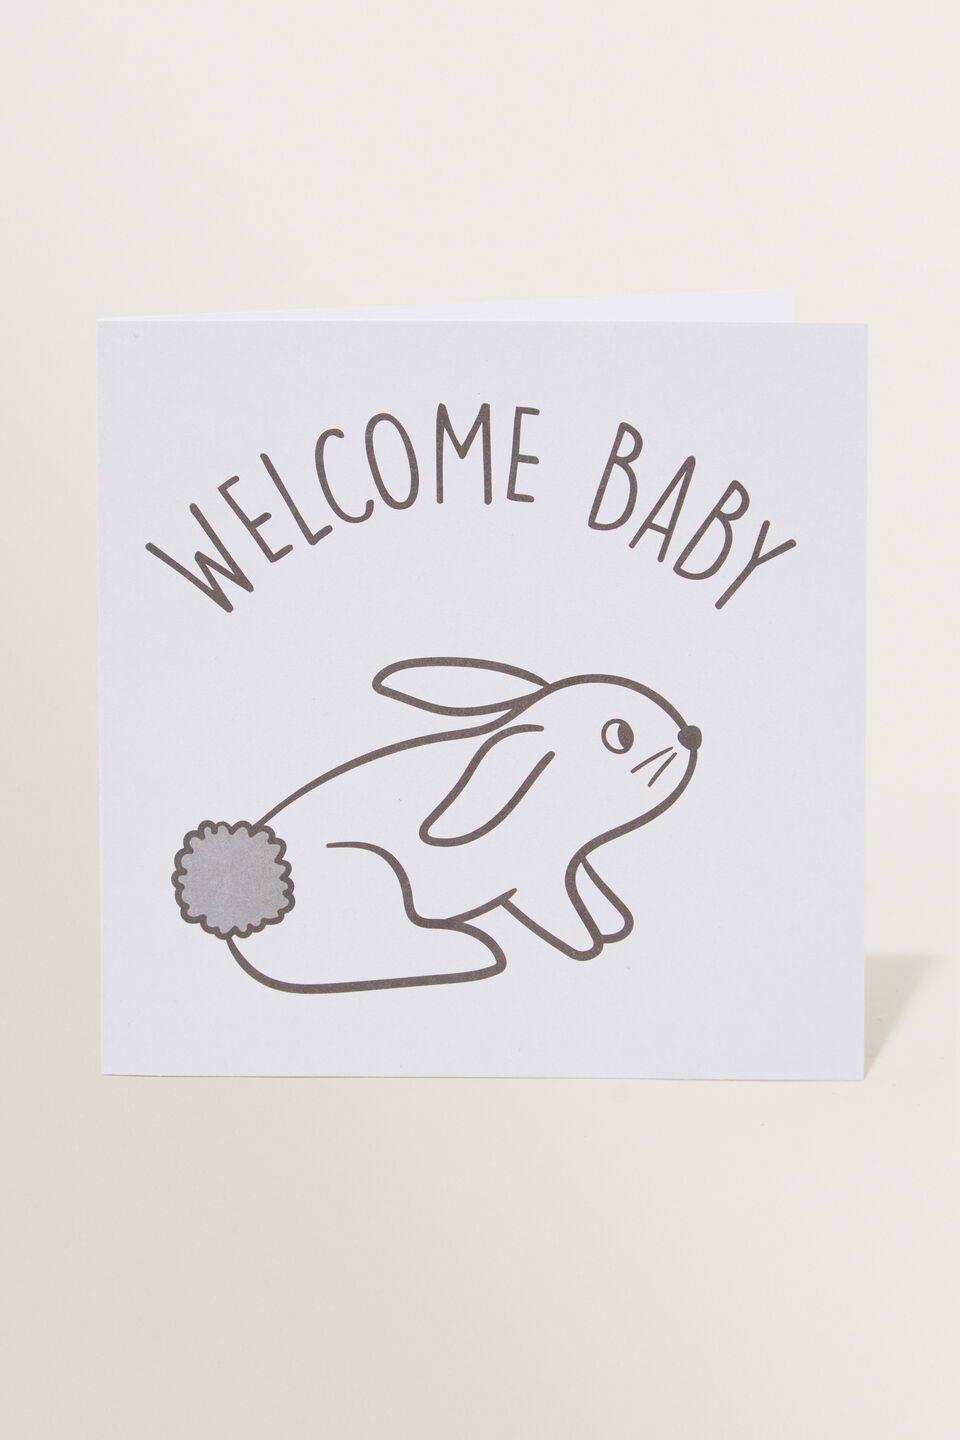 Large Welcome Baby Bunny Card  Multi